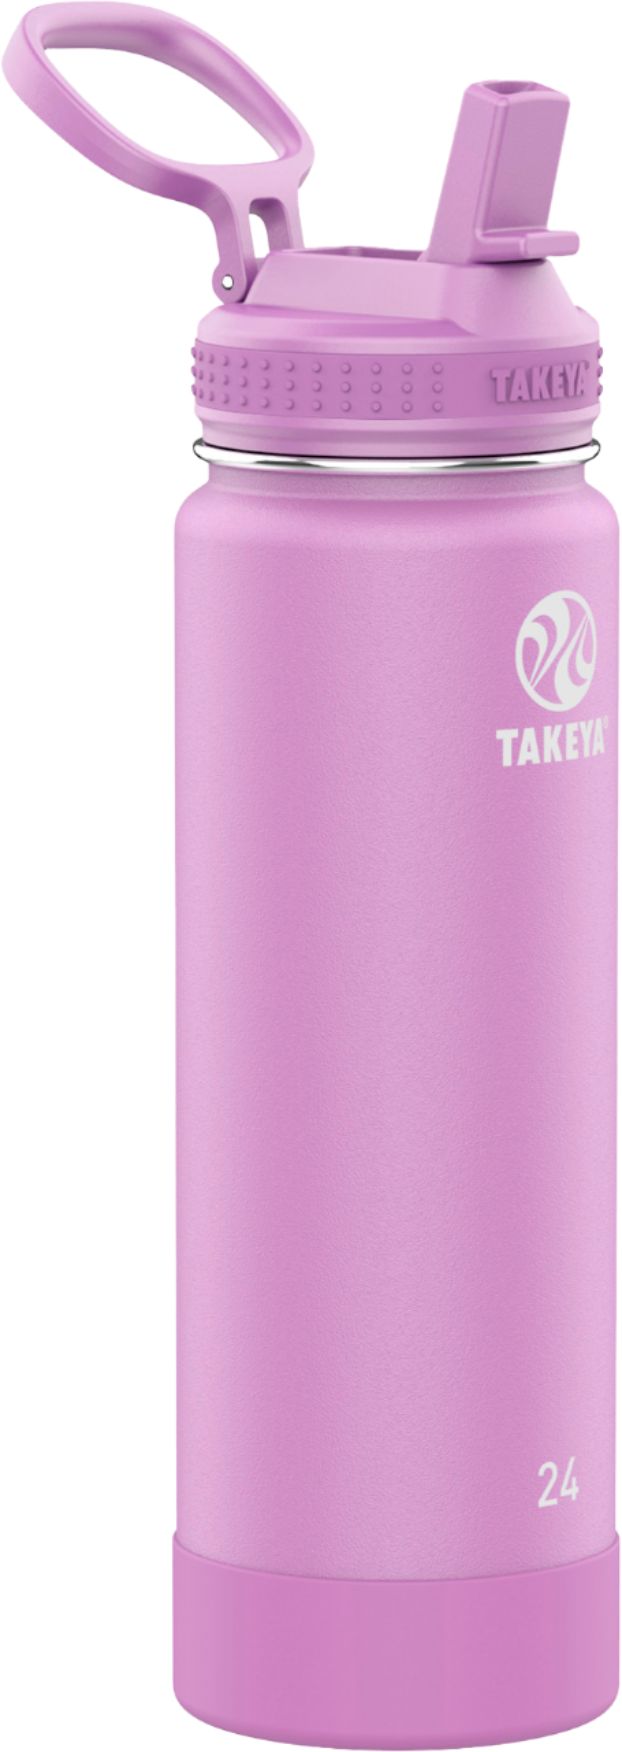 Takeya Actives Insulated Water Bottle with Spout Lid, 24 Ounce, Cobalt